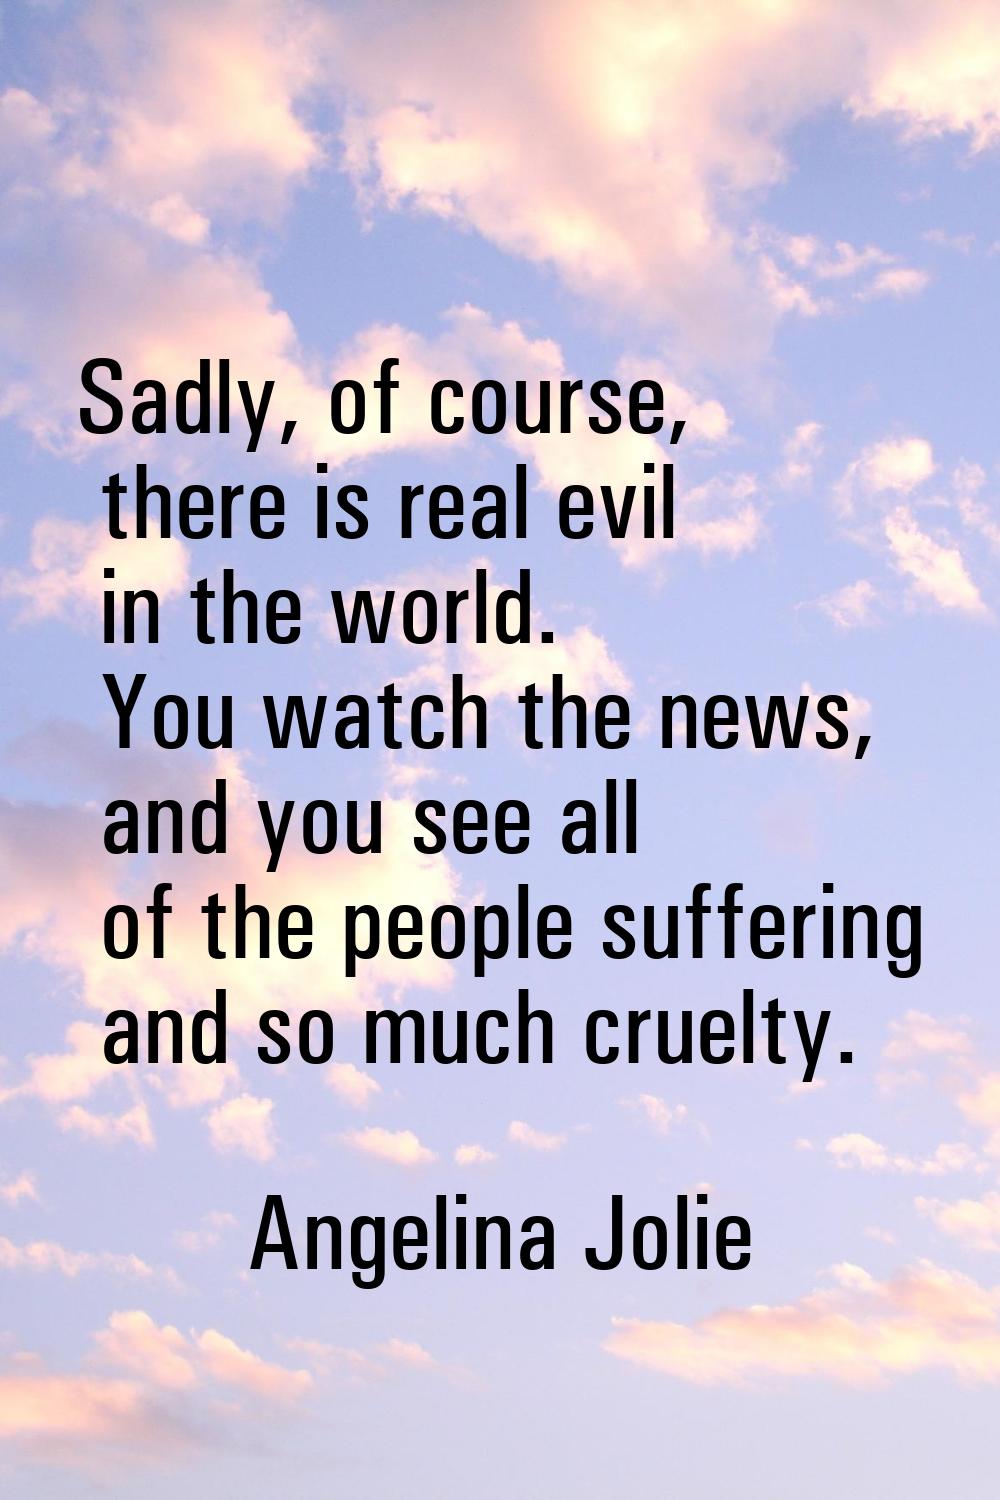 Sadly, of course, there is real evil in the world. You watch the news, and you see all of the peopl